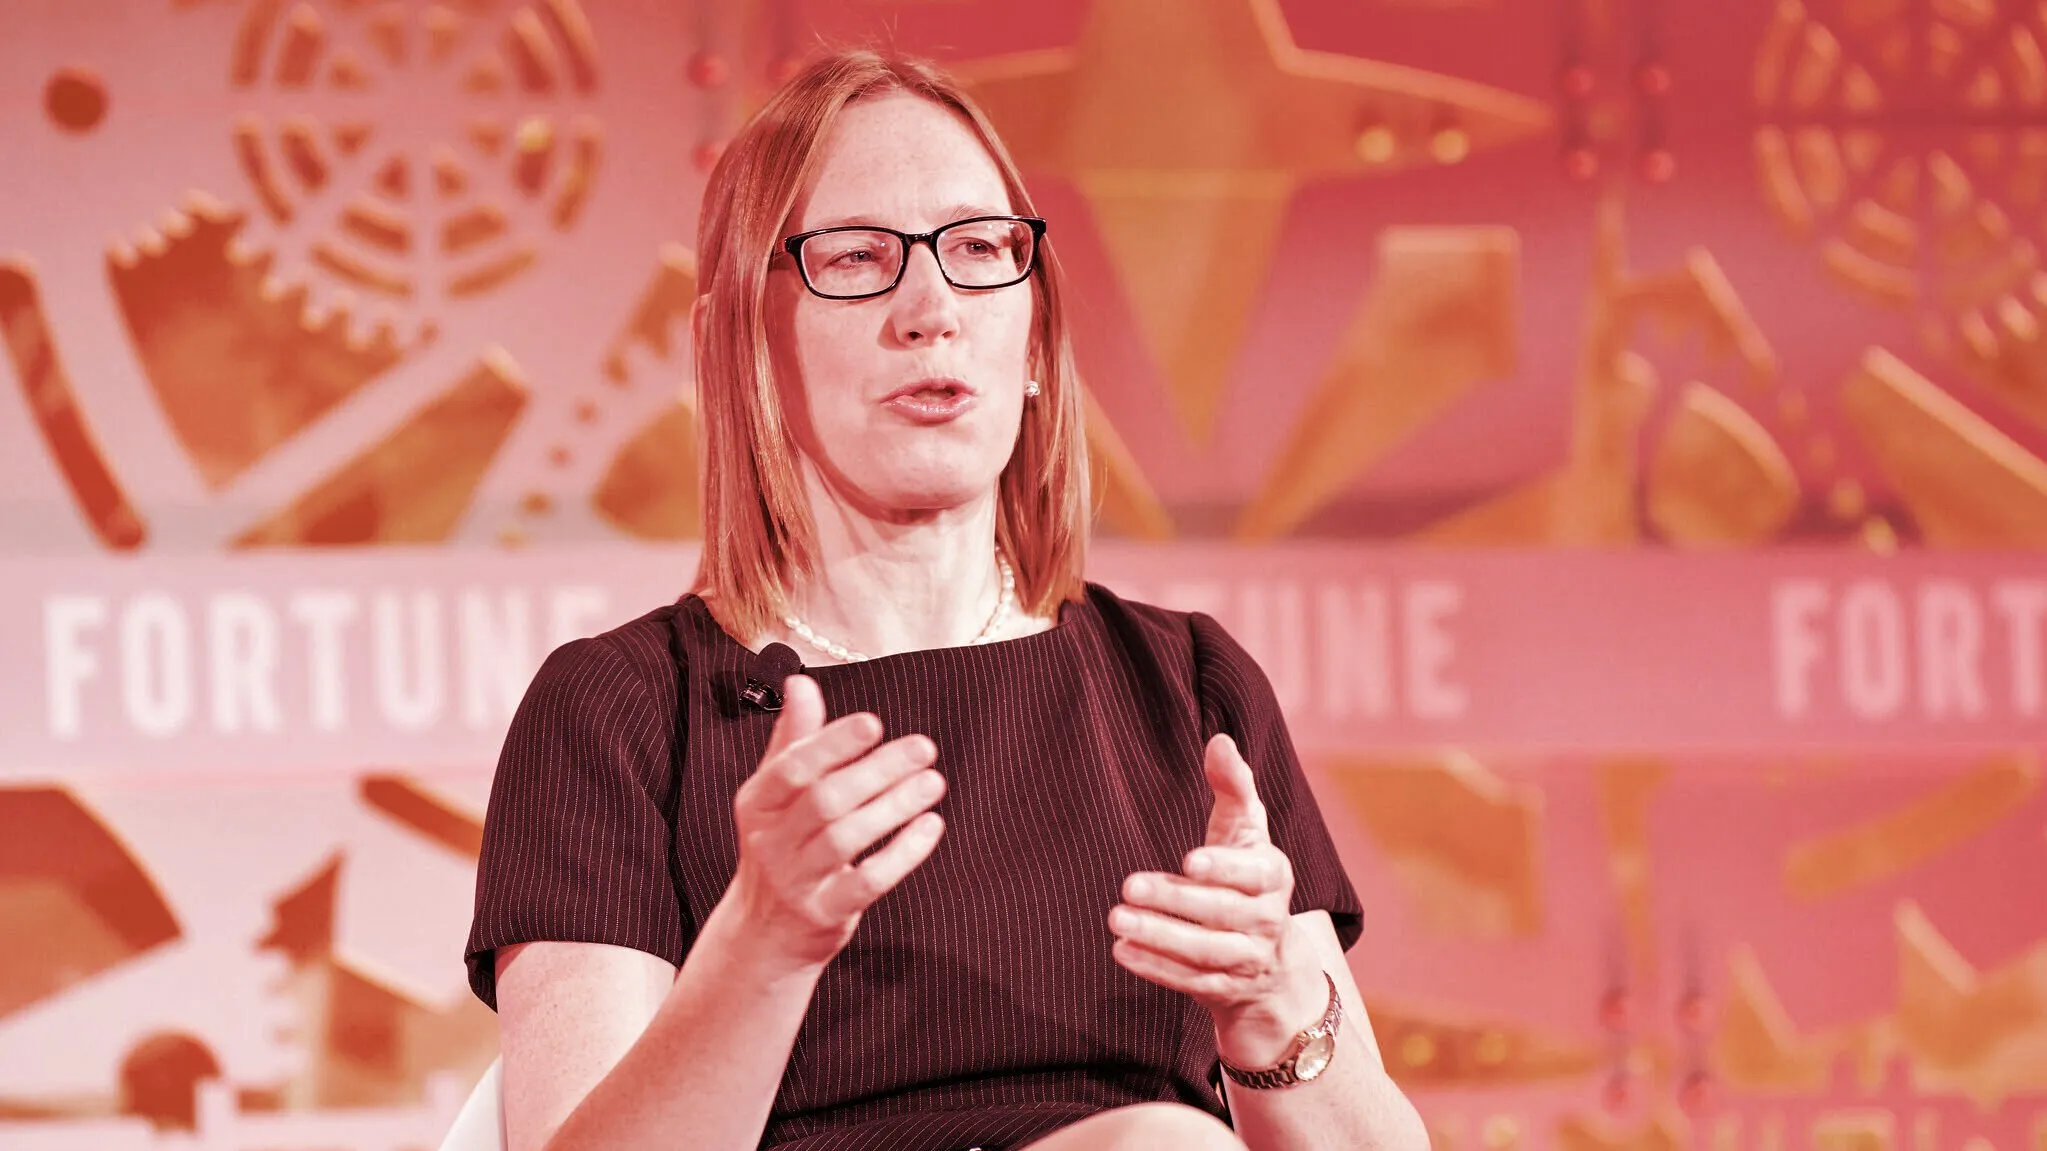 Hester Peirce at Fortune Brainstorm Tech 2019. Image: Stuart Isett for Fortune Magazine (CC BY-NC-ND 2.0)